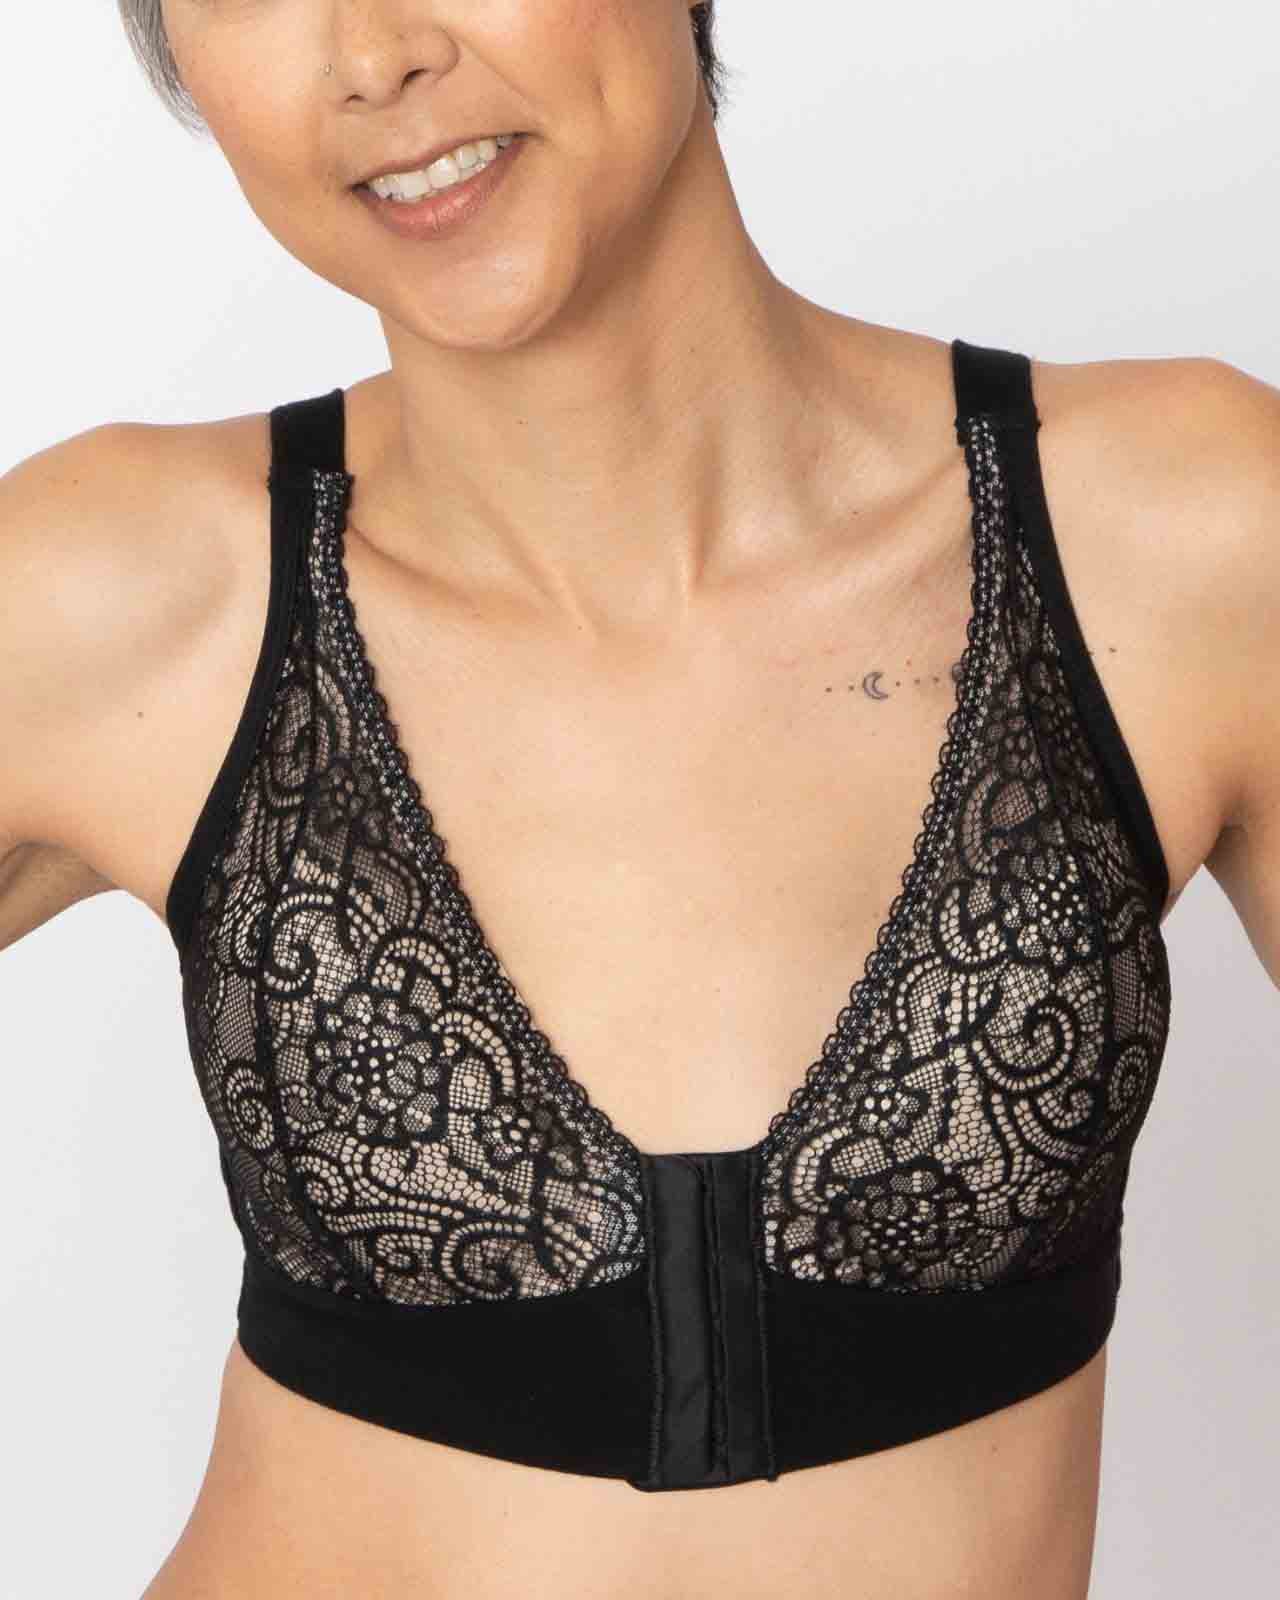 Bras For Women Lace Front on Shaping Cup Adjustable Shoulder Strap